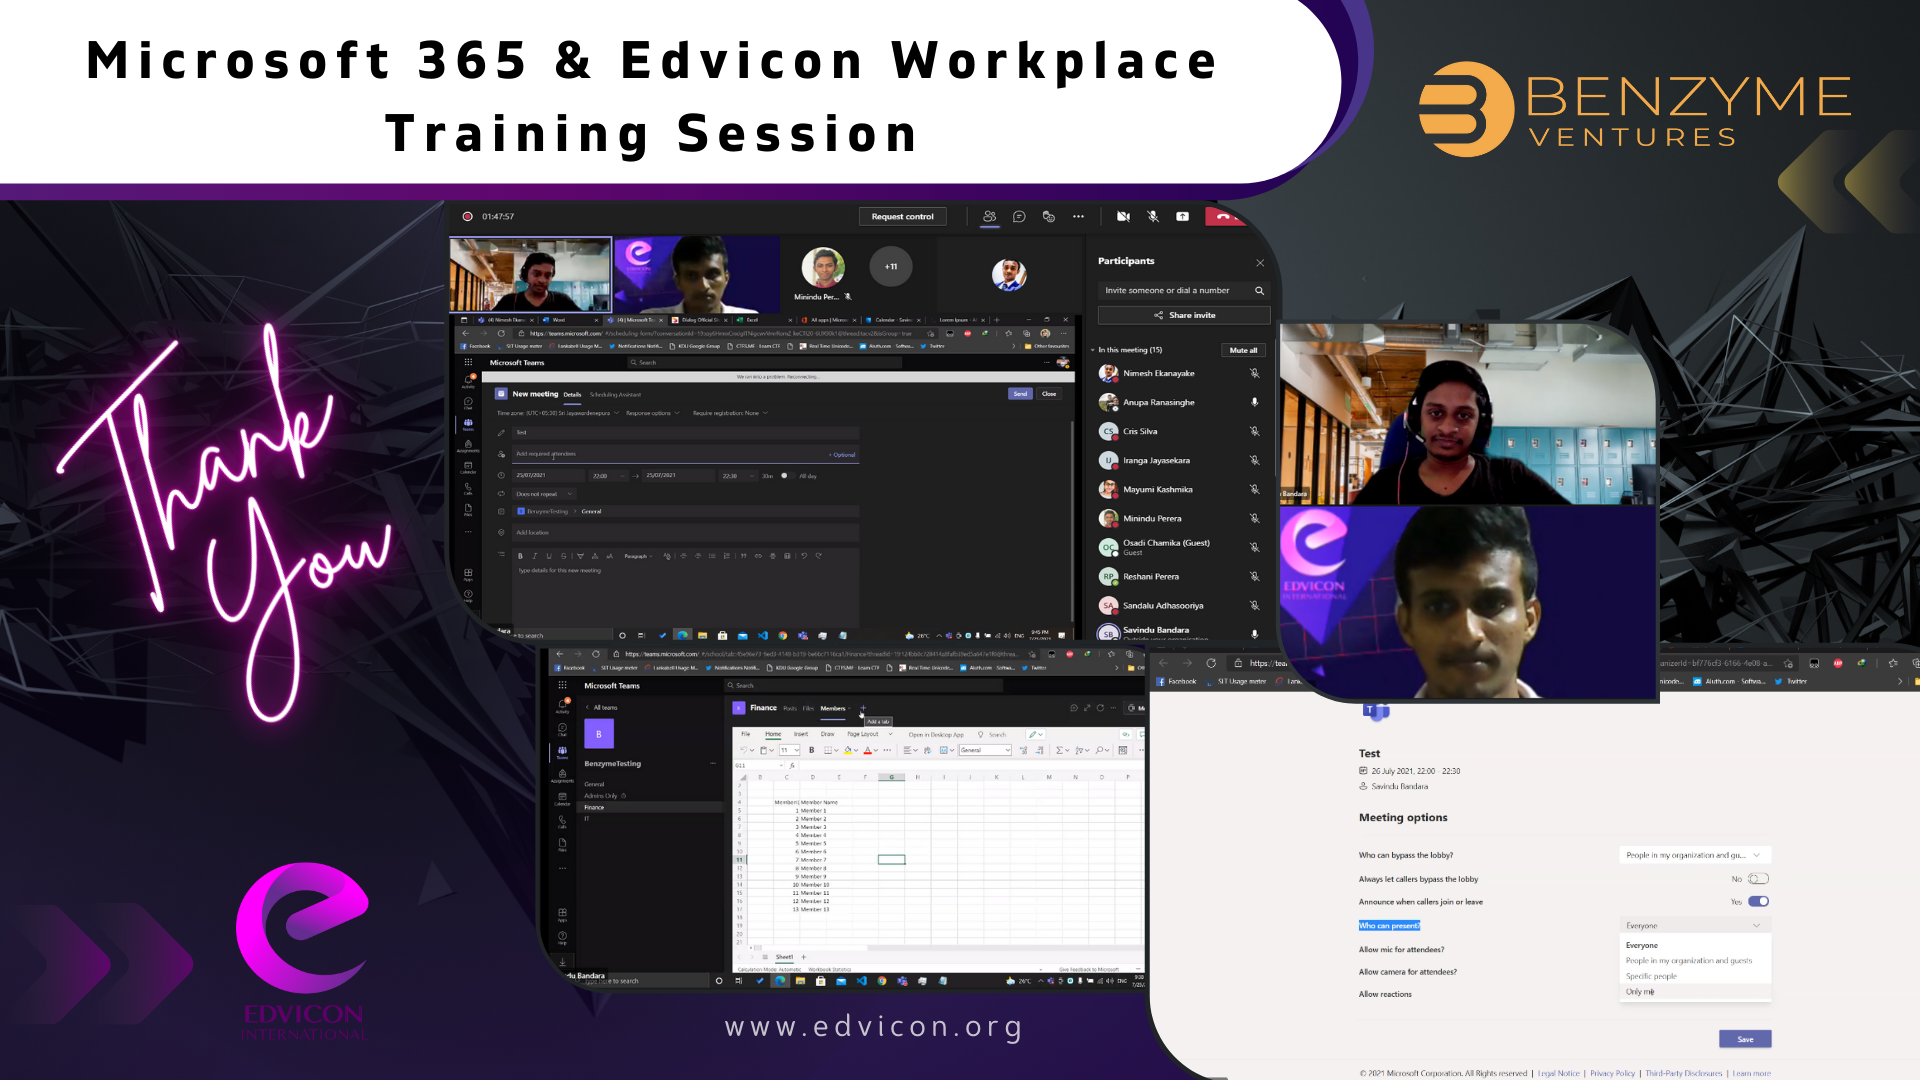 Microsoft 365 & Edvicon Workplace Training Session